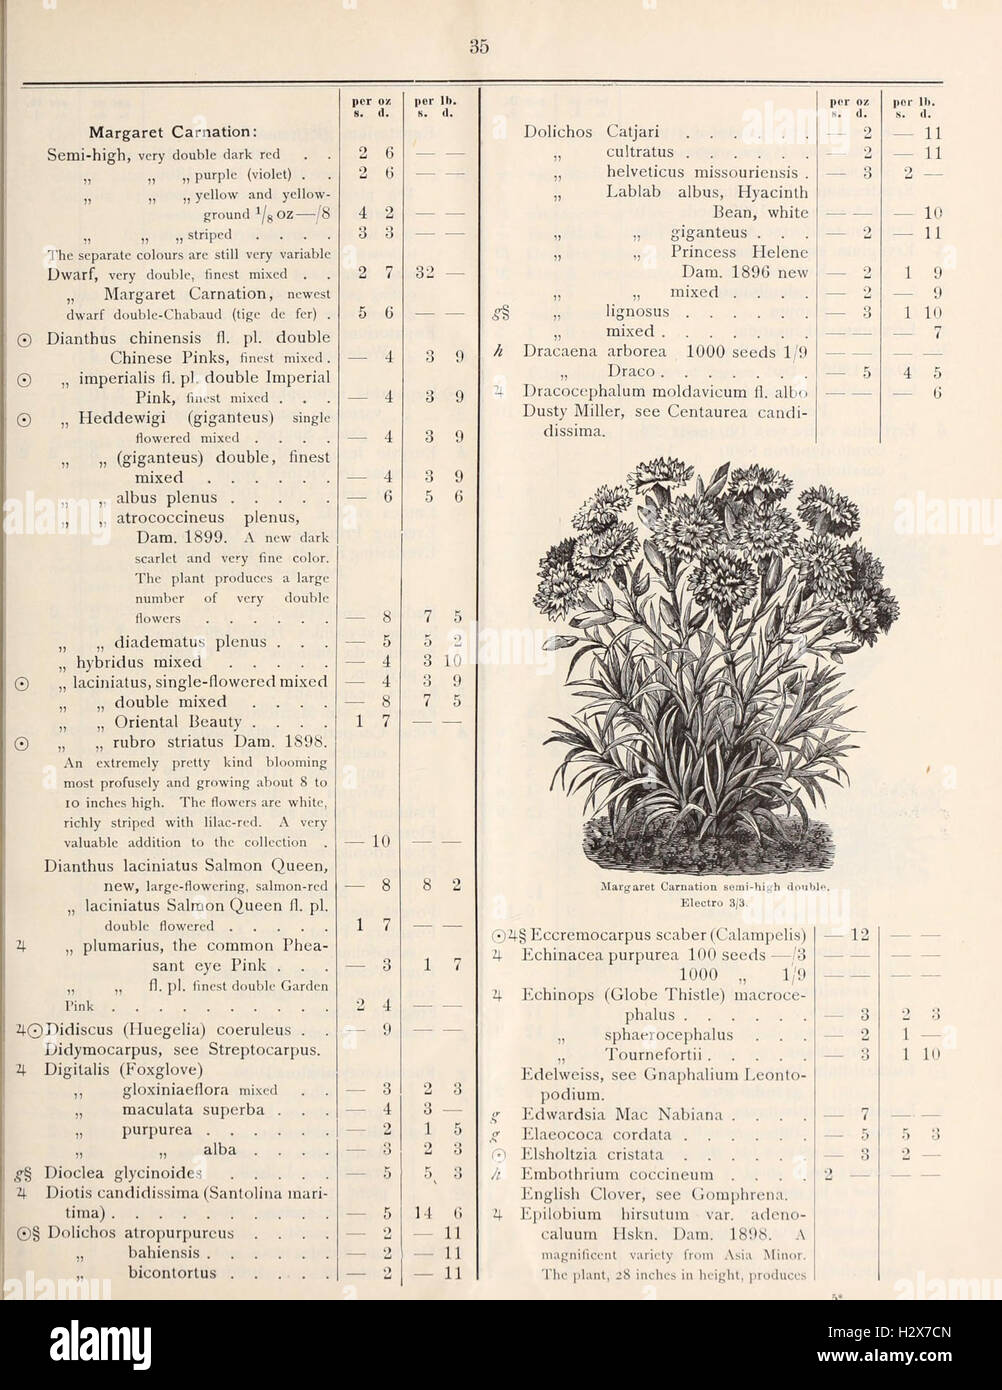 General price list of vegetable, farm, tree, conifer, palm, flower and other seeds, canna roots, Italian fruit trees, plants, novelties of seeds and c. and c (Page 35) BHL451 Stock Photo